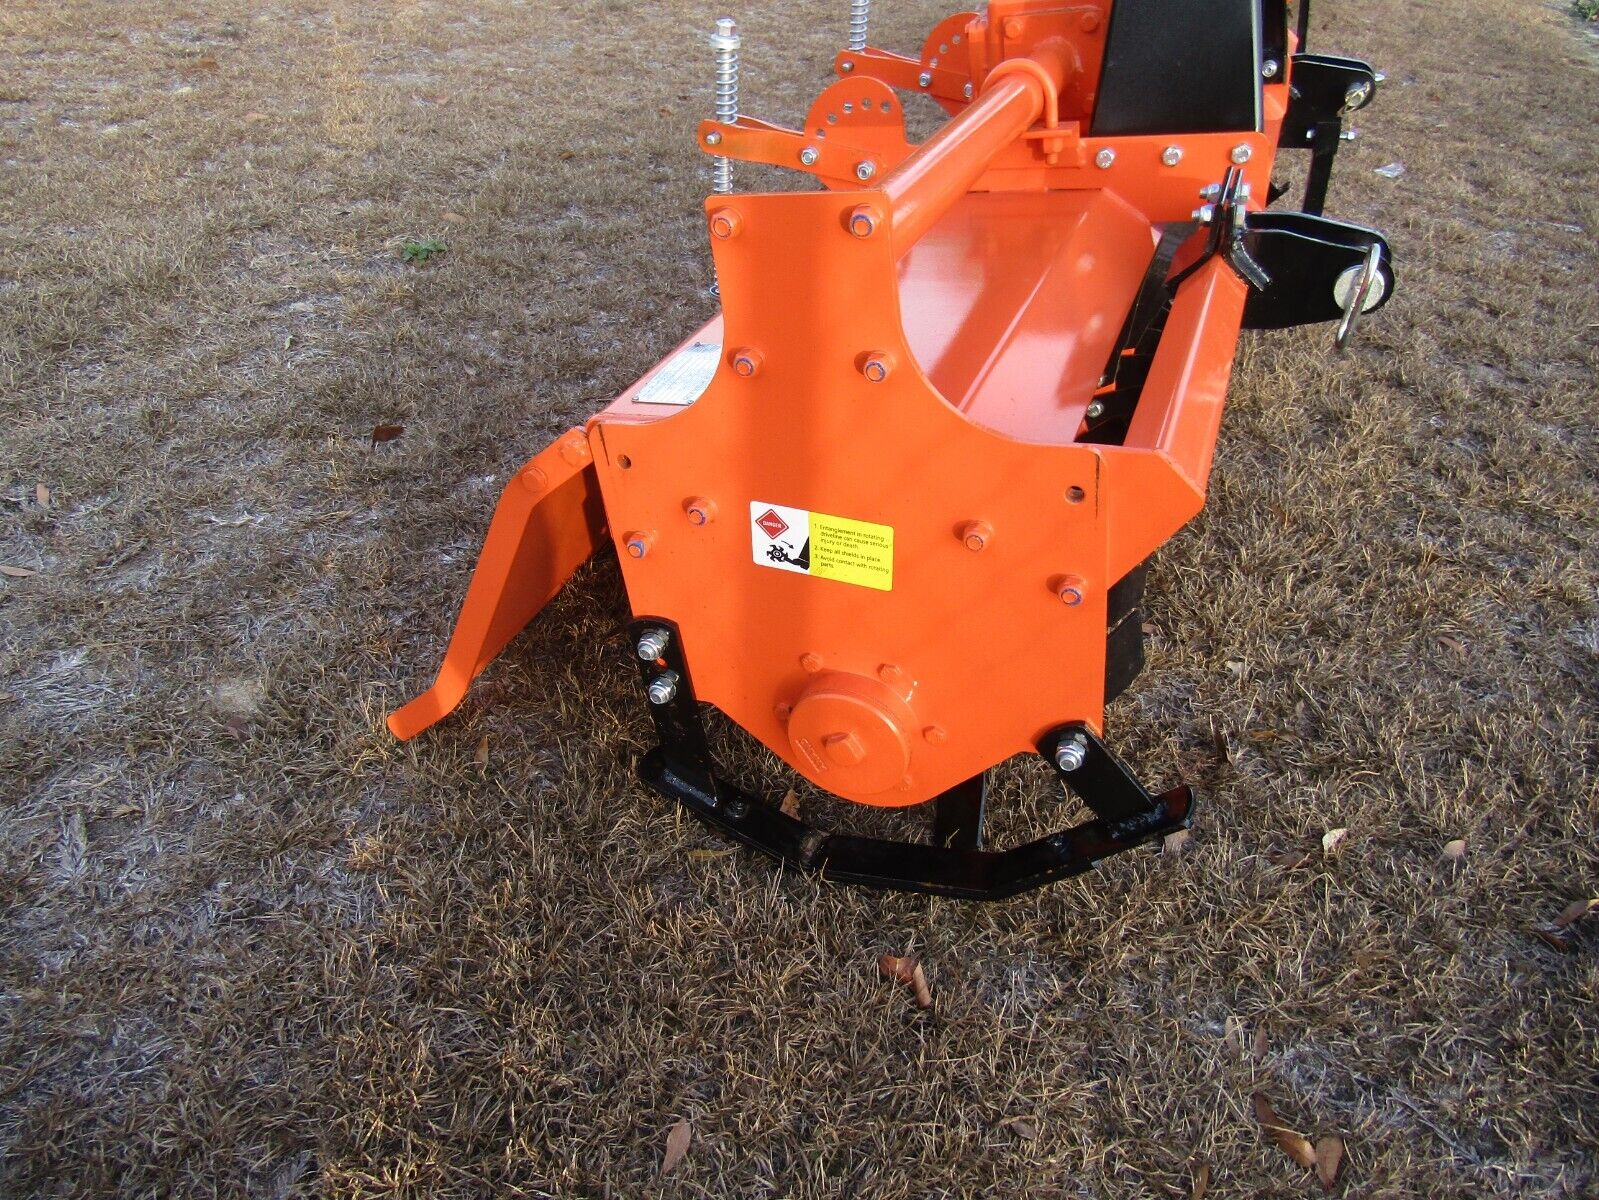 82" Rotary Tiller, HD Gear drive (no chain), slip clutch pto, all welded A-Frame